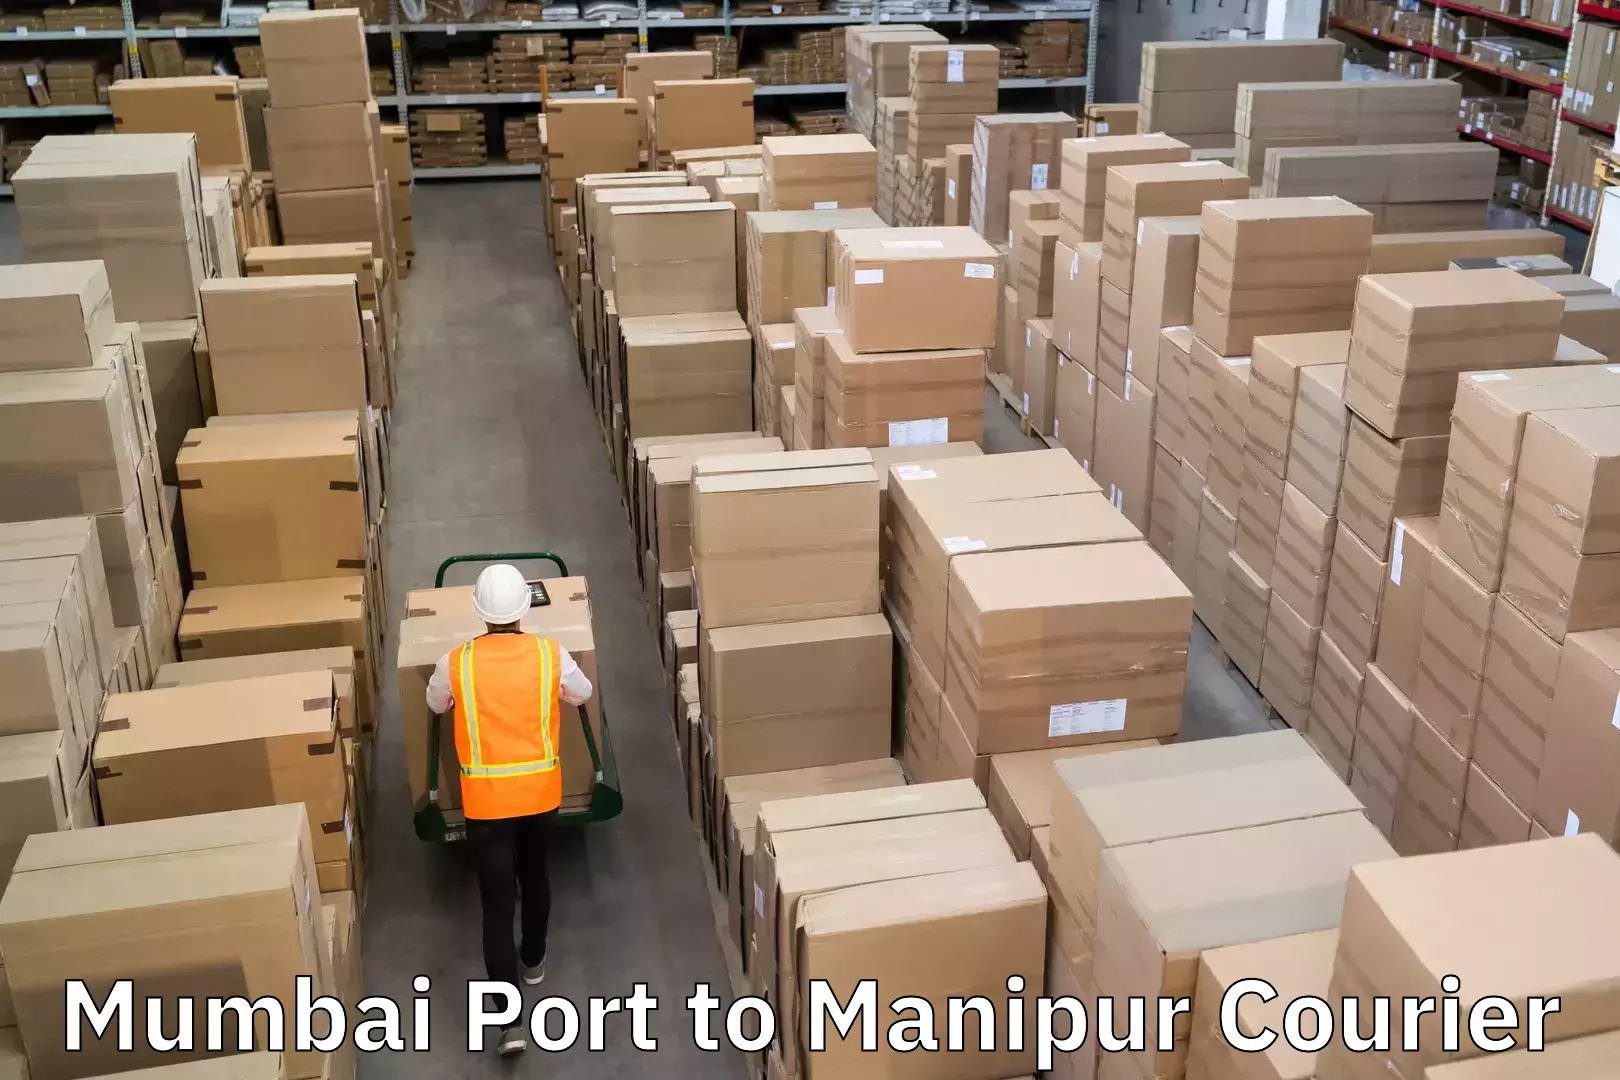 On-call courier service in Mumbai Port to Kanti